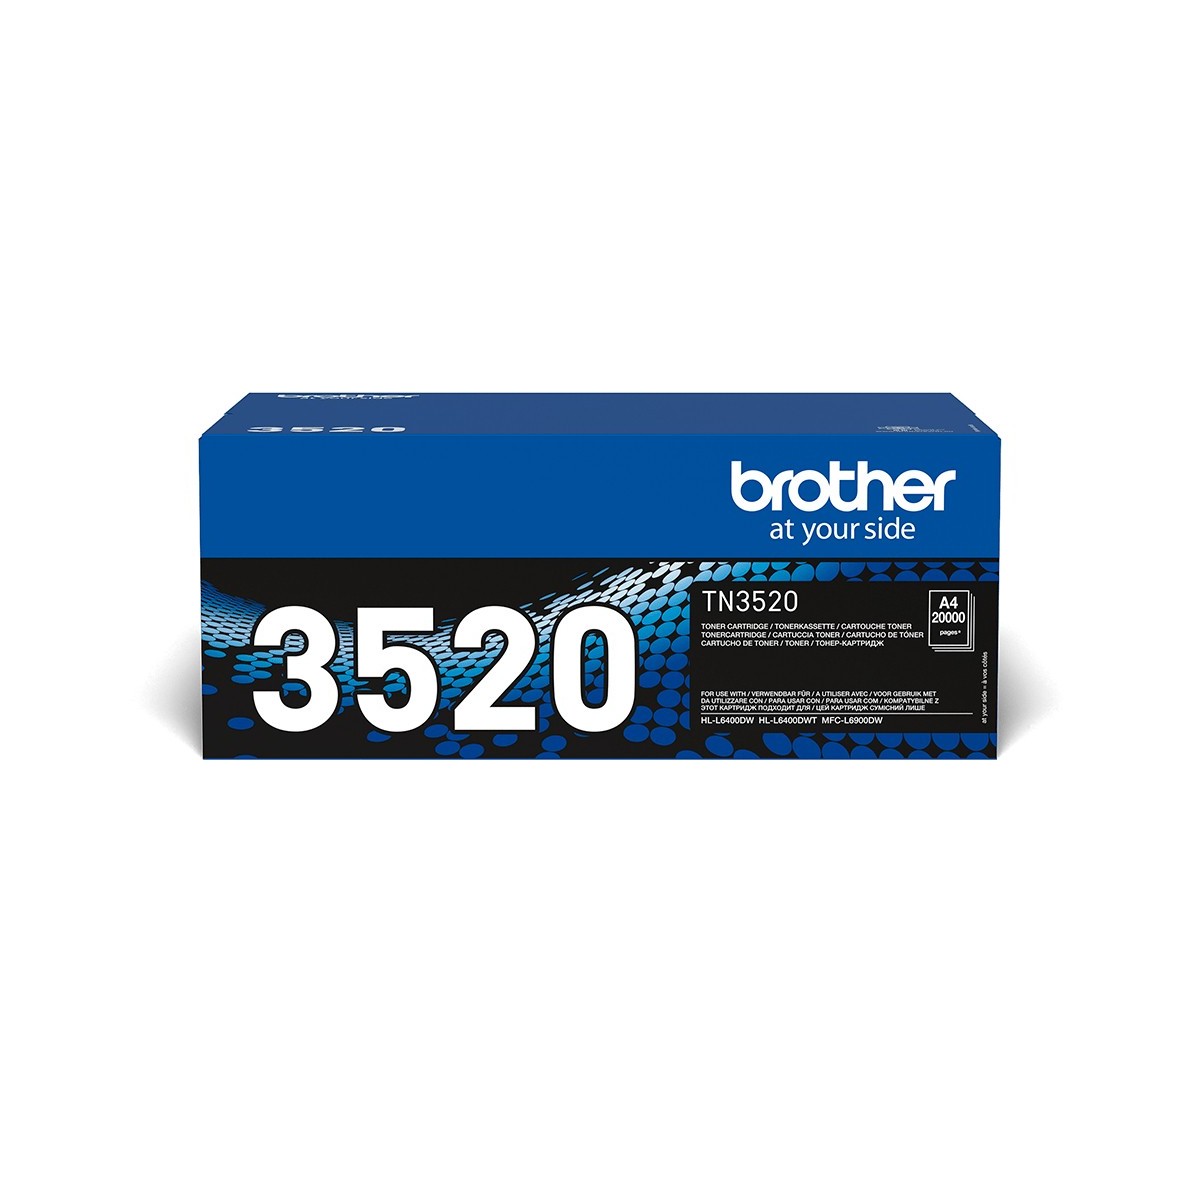 Brother TN-3520 - 20000 pages - Black - 1 pc(s)